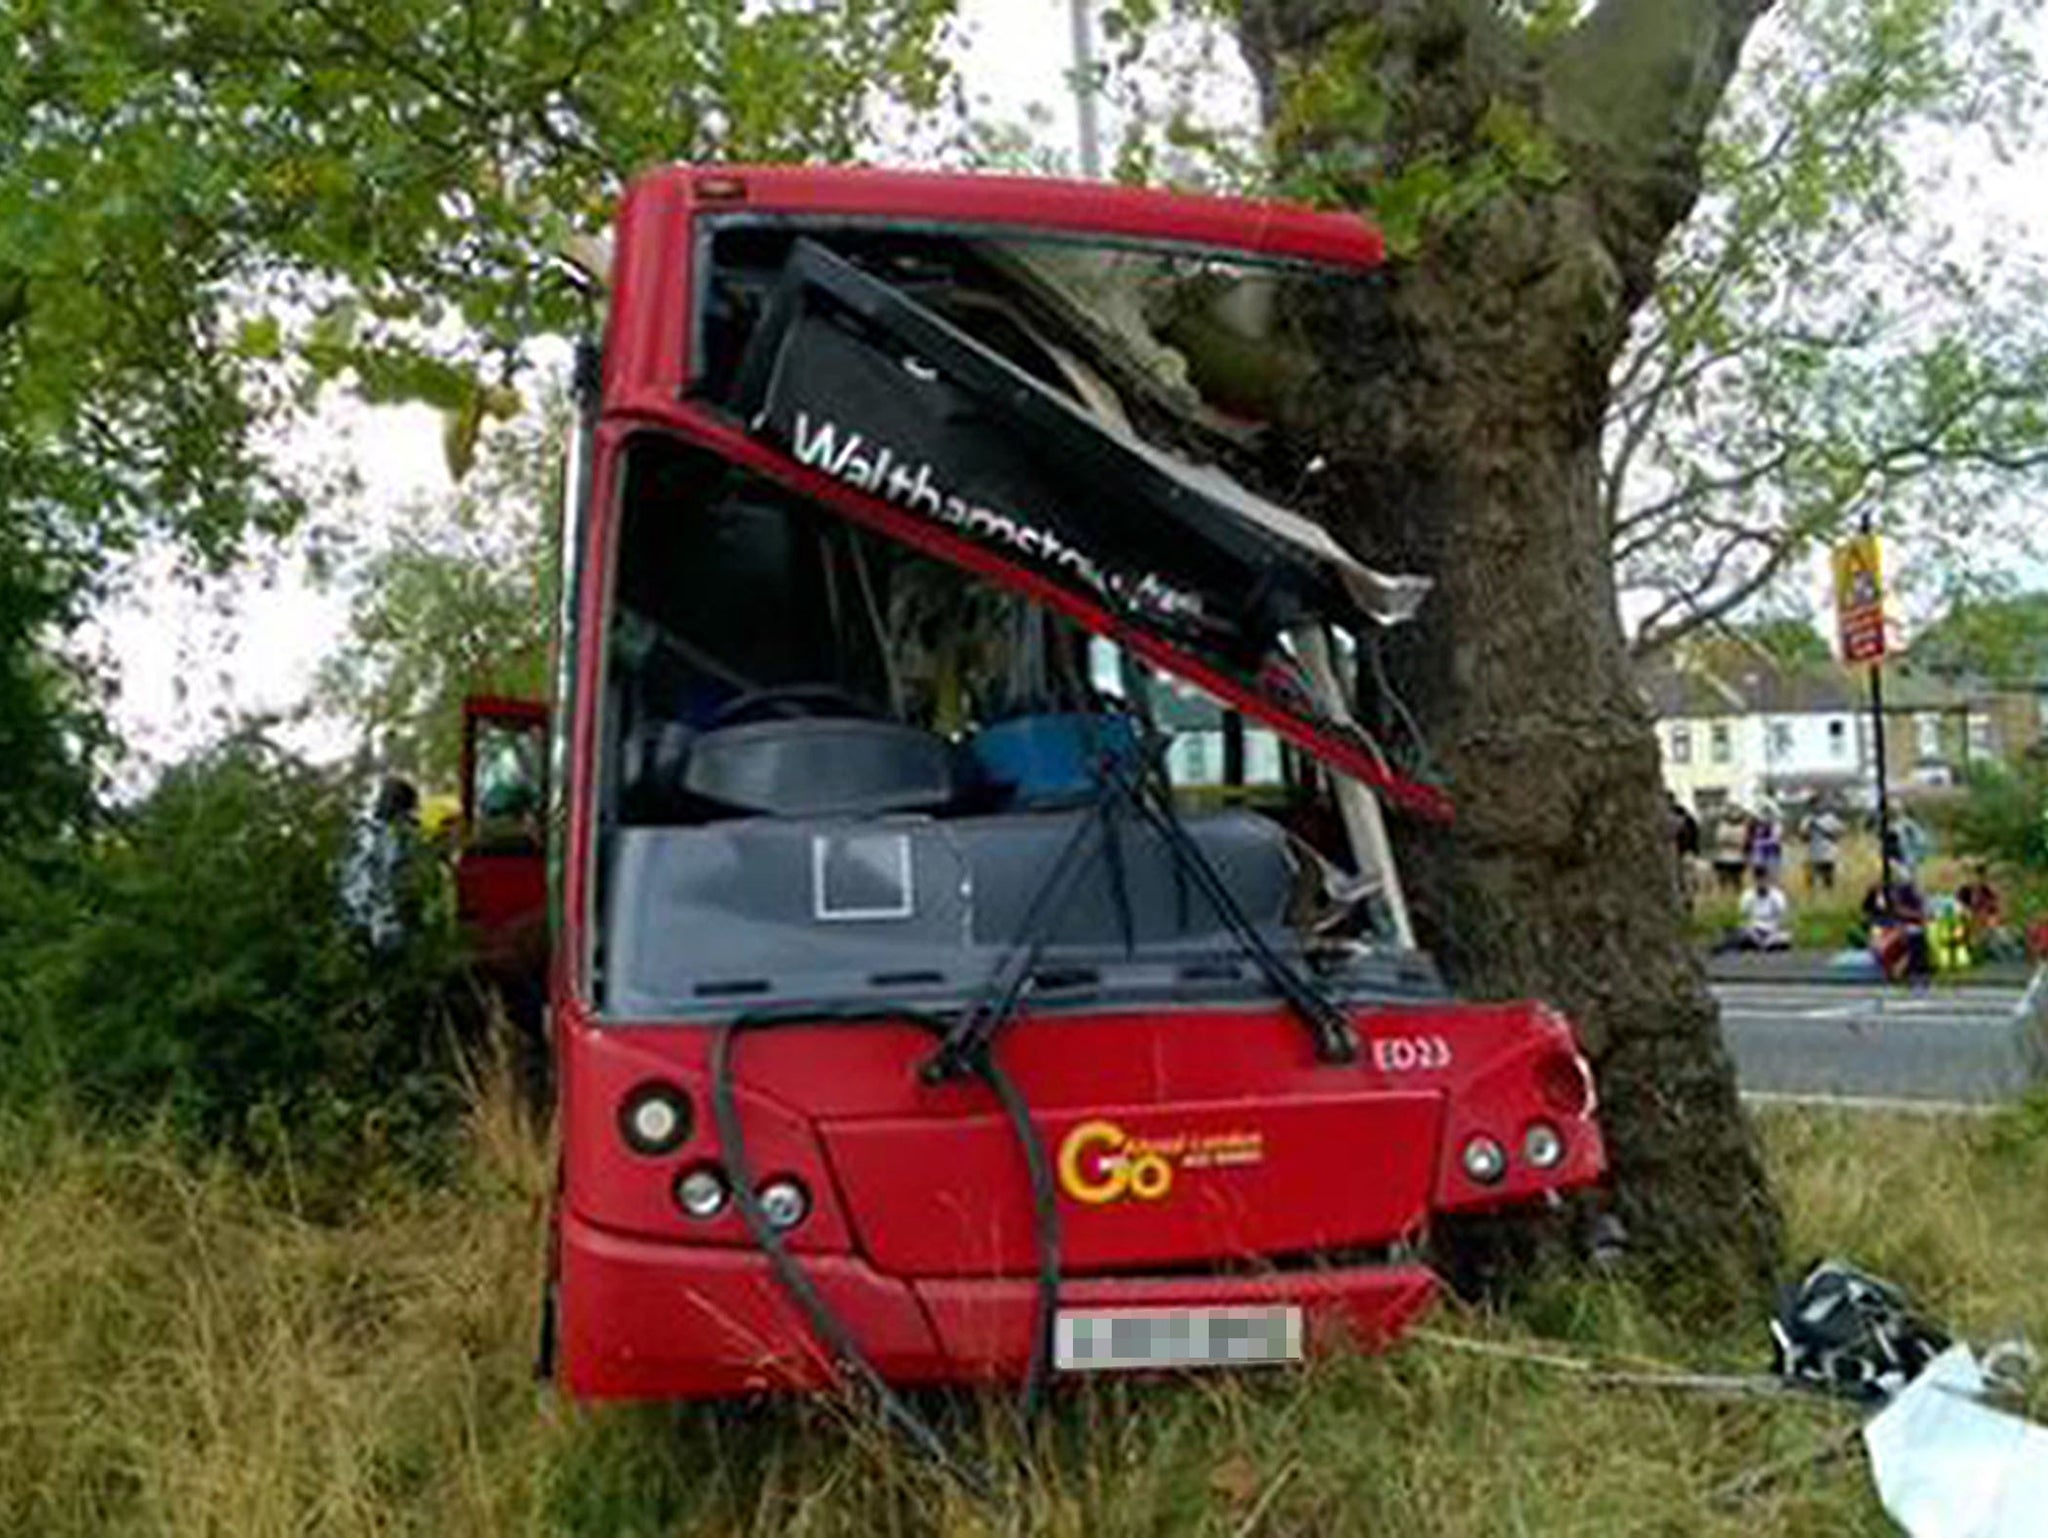 Bus collision near Manor Park station in Newham